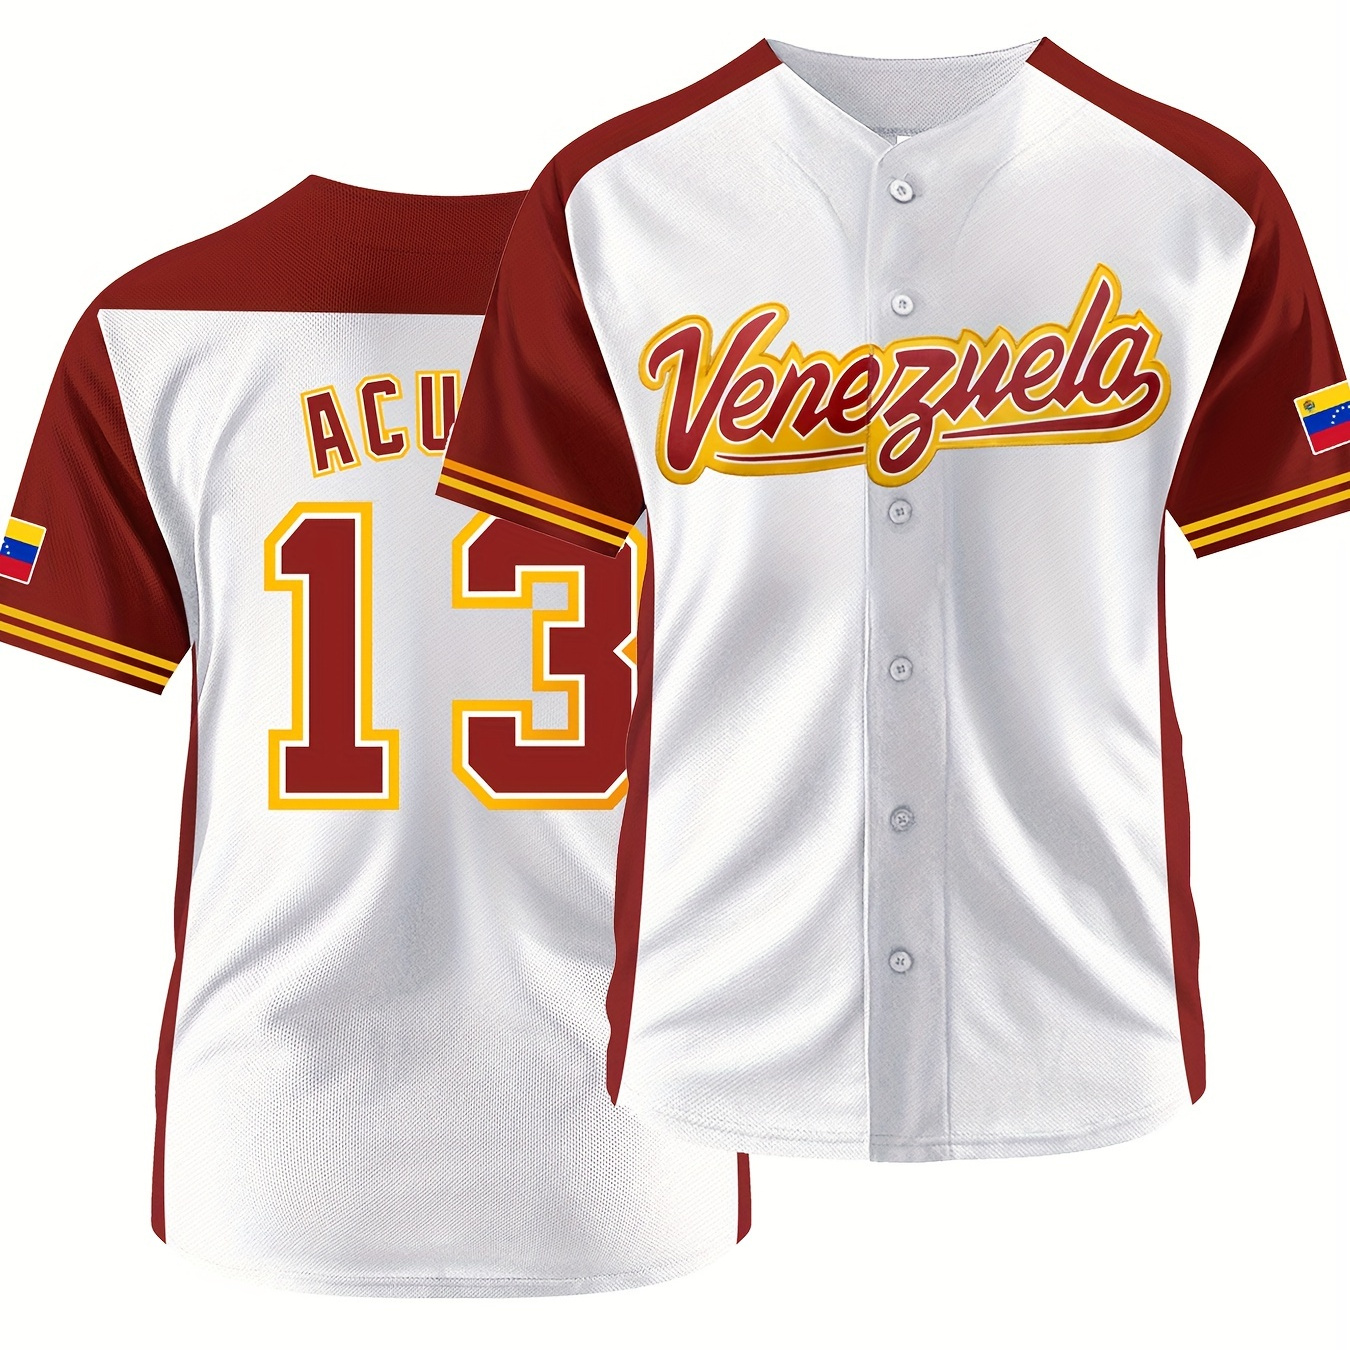 

Venezuela And Number 13 Embroidery, Men's Short Sleeve V-neck Baseball Jersey, Comfy Top For Training And Competition